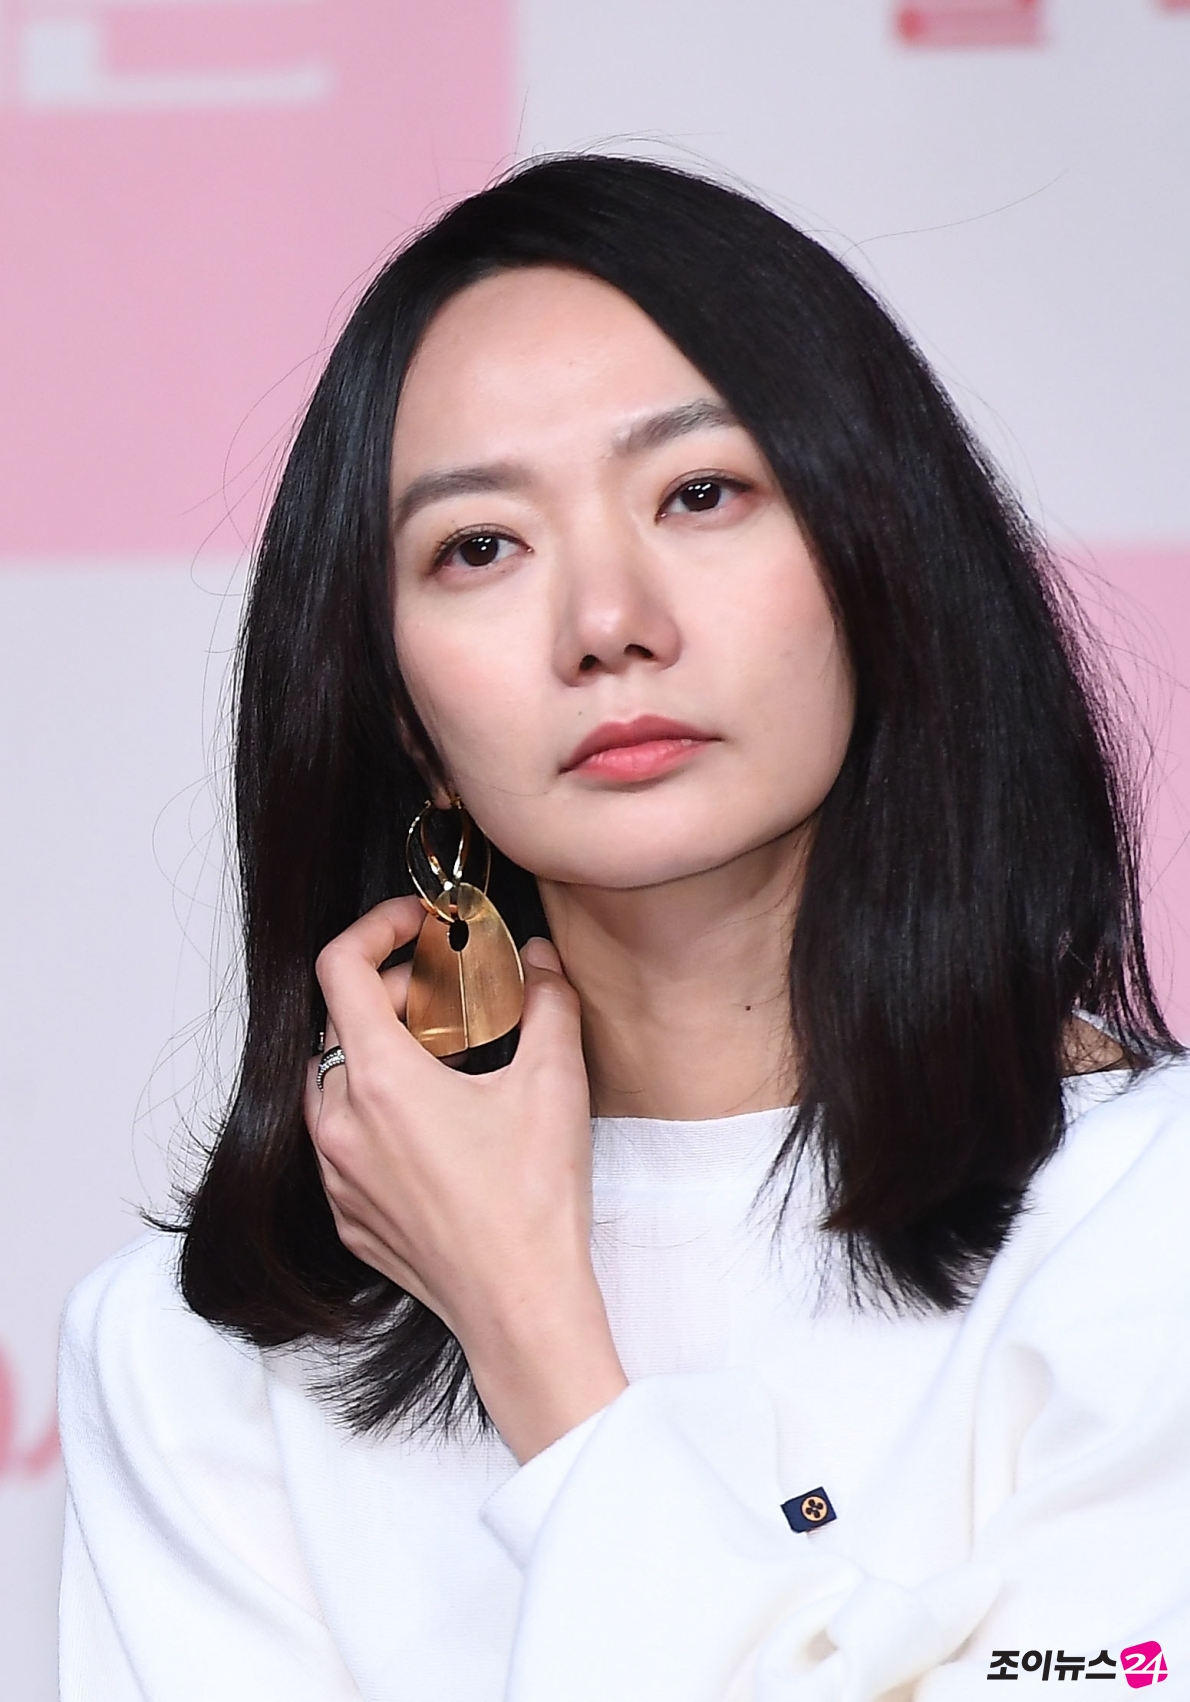 Actor Bae Doona attends the KBS2 monthly drama Best Divorce (director Yoo Hyun-ki) production presentation at the Juamorris Stewart Times Square in Yeongdeungpo-dong, Seoul on the afternoon of the 5th.Best divorce is Is marriage really the completion of love?And Cha Tae-hyun, Bae Doona, Lee El, Son Seokgu, and Moon Sook appear in the work that honestly depicts the difference between men and women about love, marriage and family.The first broadcast on the 8th.